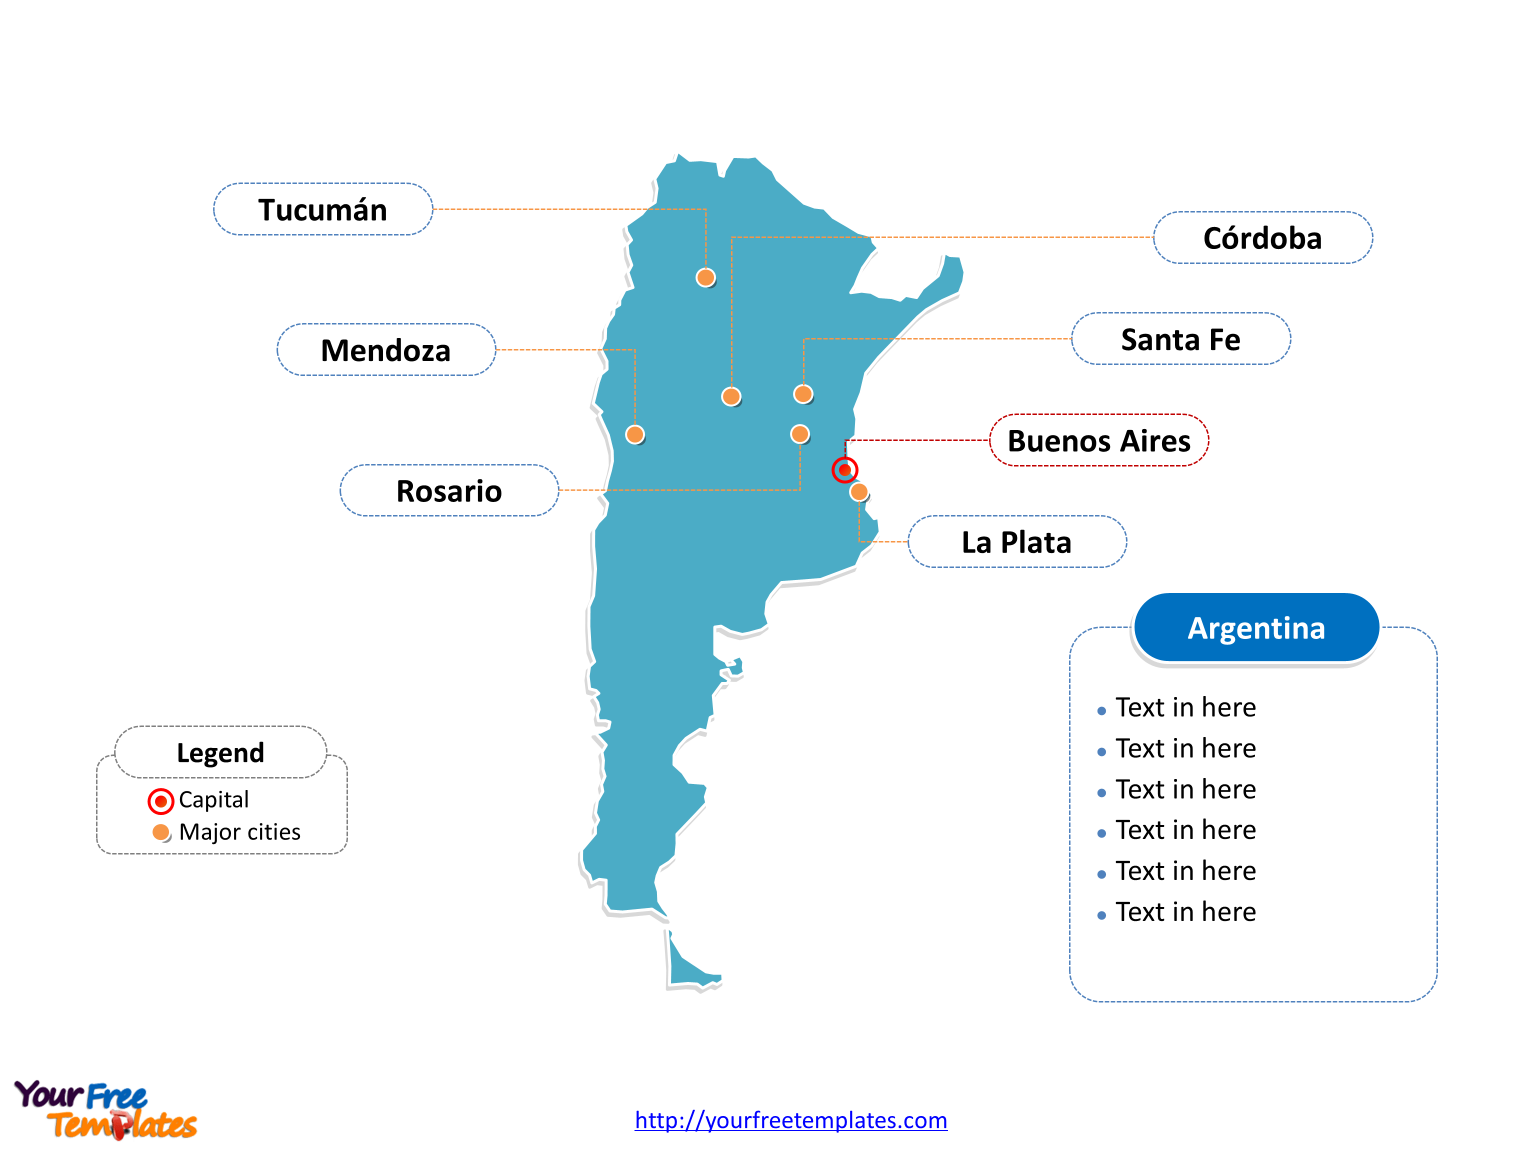 Free Argentina Powerpoint Map Free Powerpoint Templates